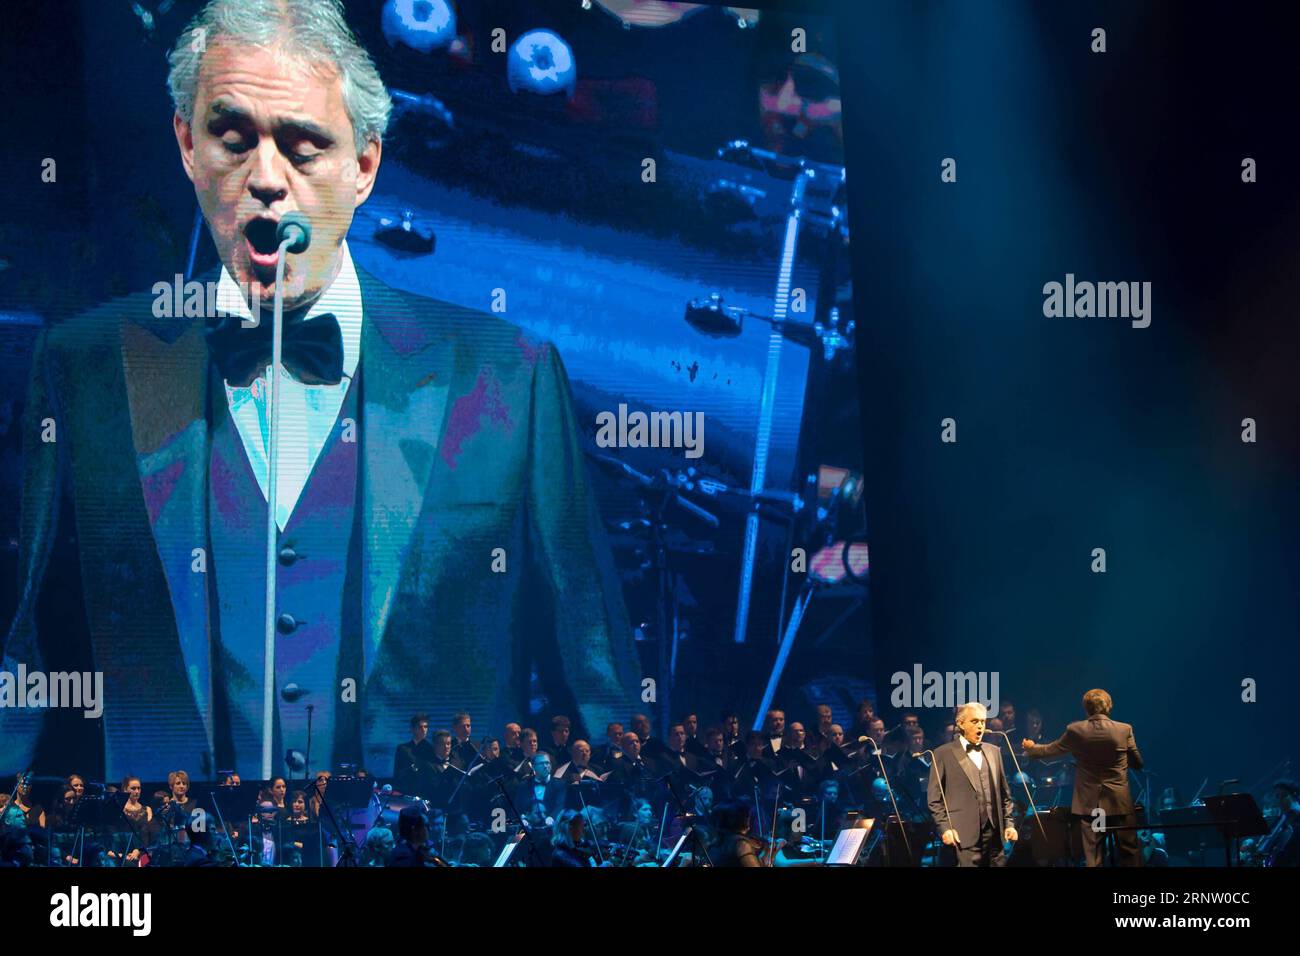 (171125) -- BUDAPEST, Nov. 25, 2017 -- Italian blind opera singer Andrea Bocelli (L, Front) sings during his concert at Papp Laszlo Sports Arena in Budapest, Hungary, on Nov. 25, 2017. ) HUNGARY-BUDAPEST-ITALY-ANDREA BOCELLI-CONCERT AttilaxVolgyi PUBLICATIONxNOTxINxCHN Stock Photo